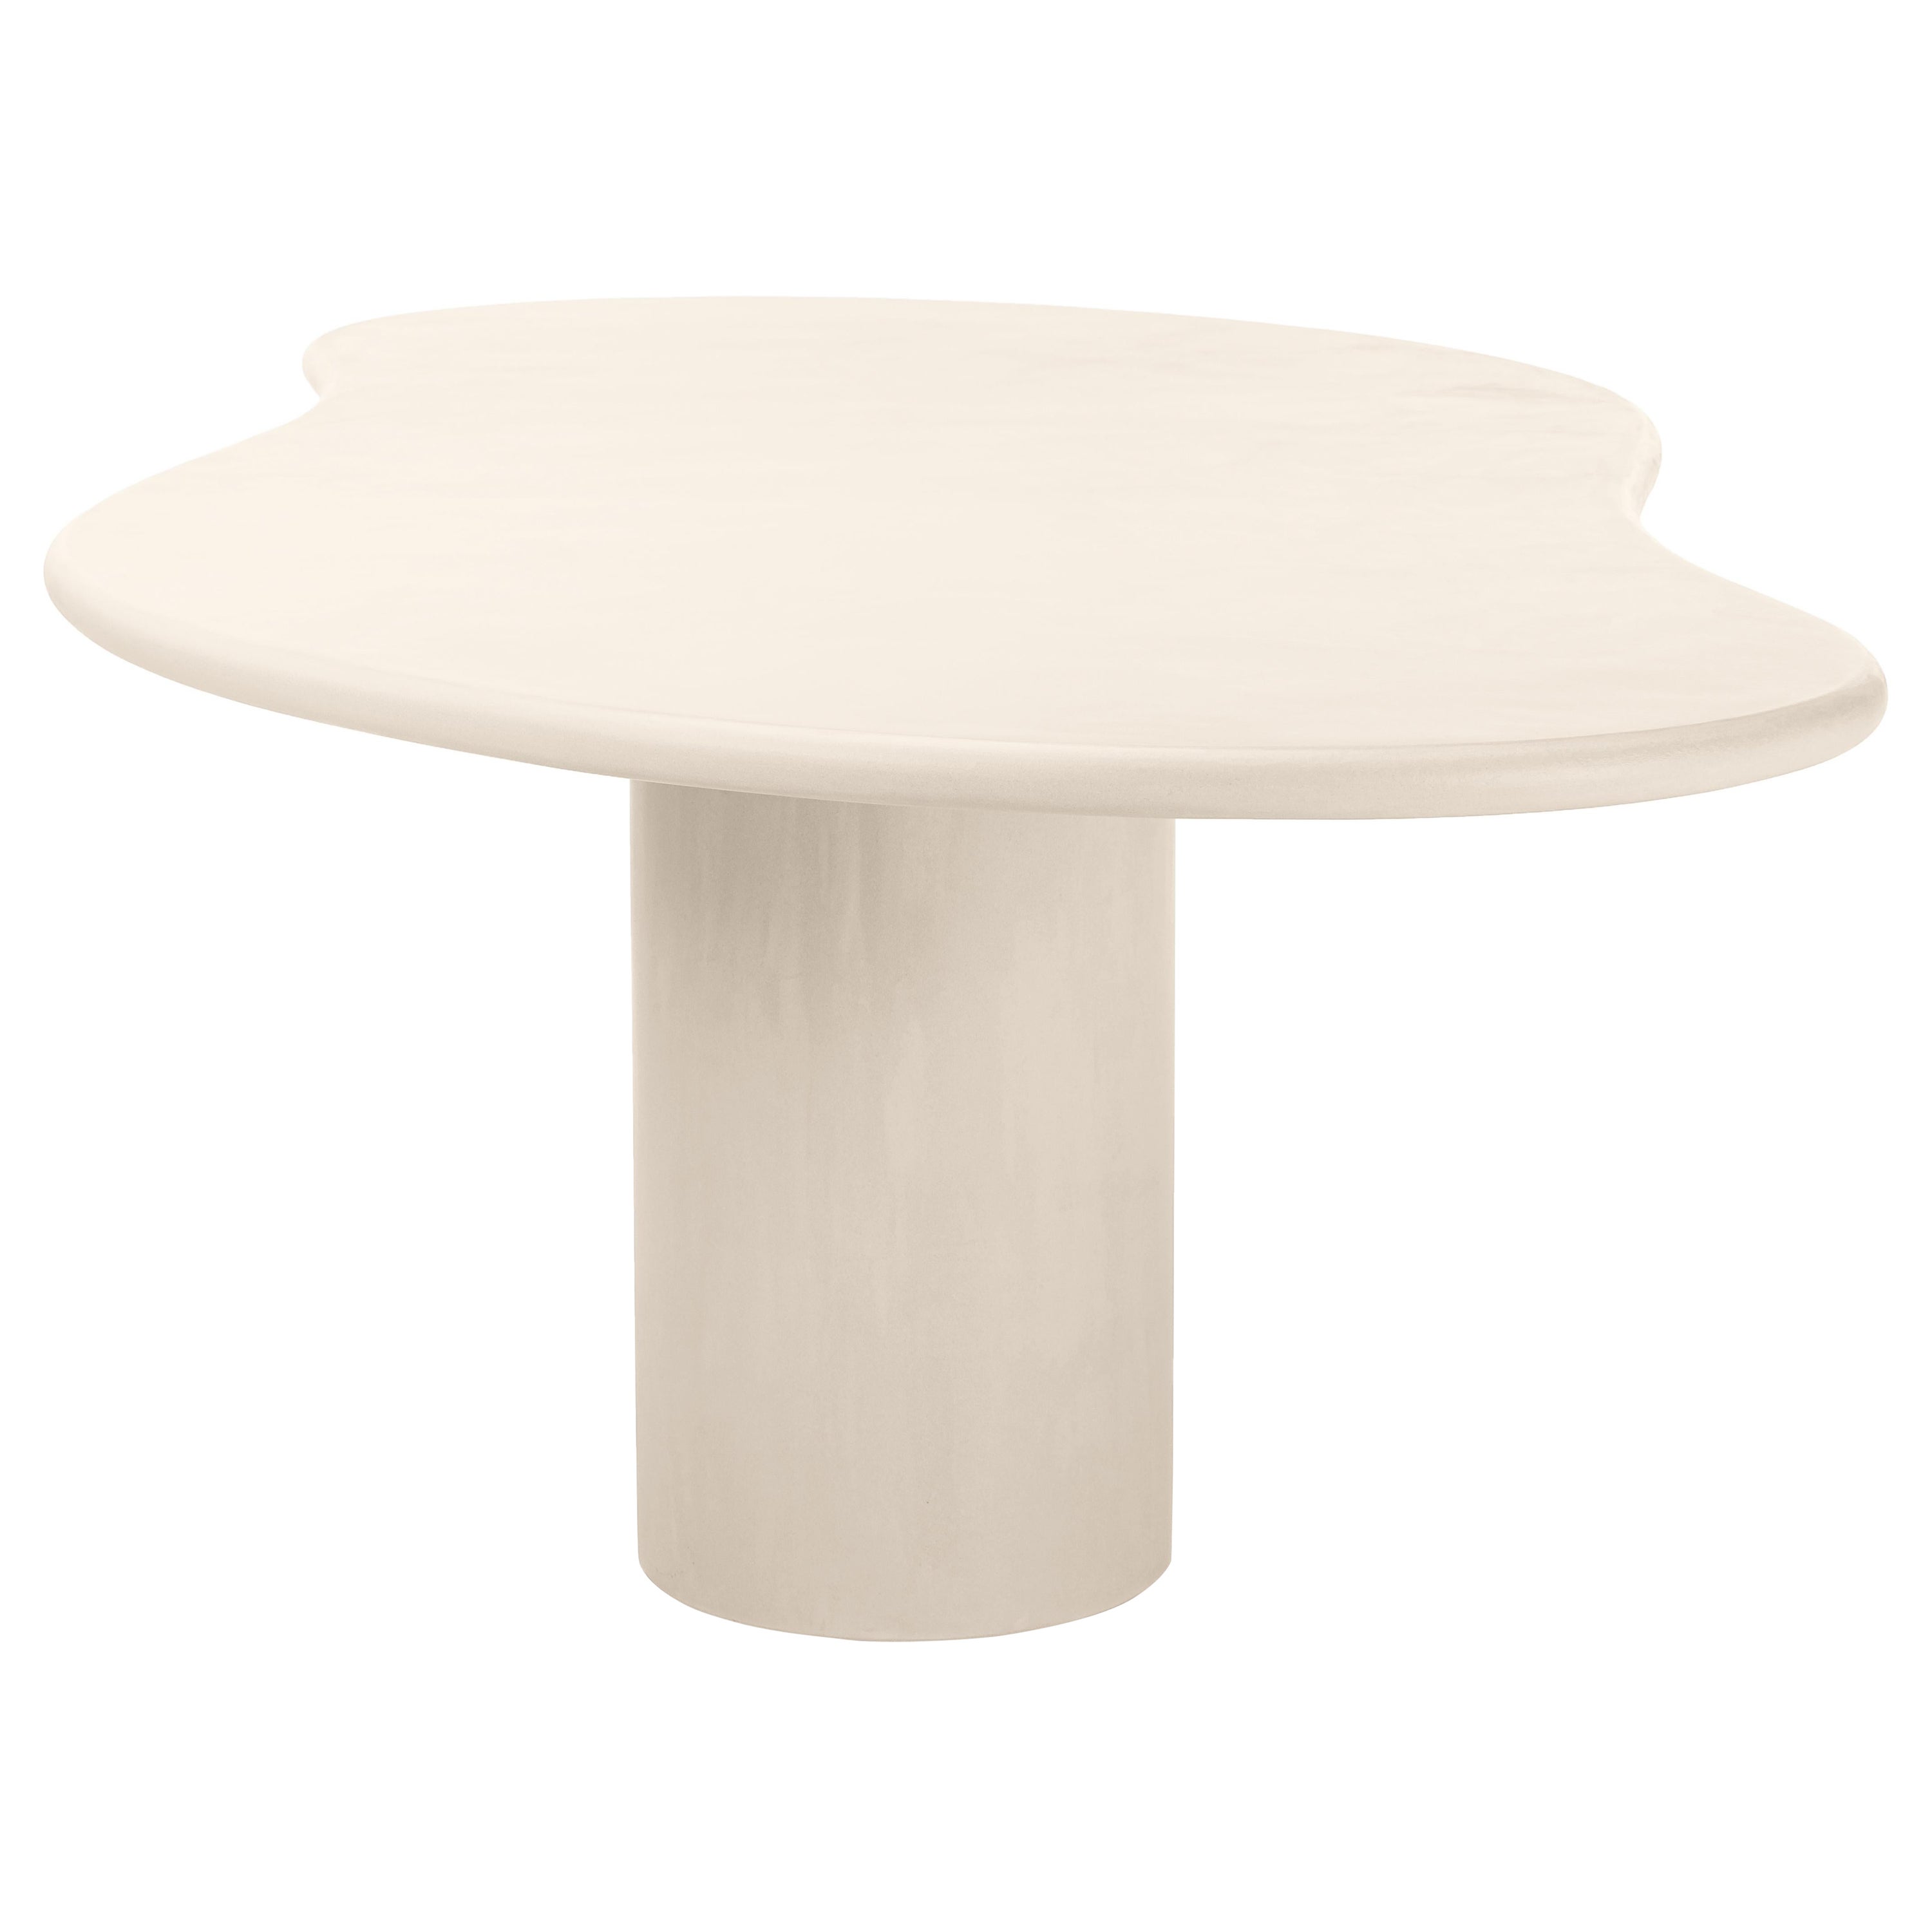 Natural Plaster Dining Table "Latus" 320 by Isabelle Beaumont